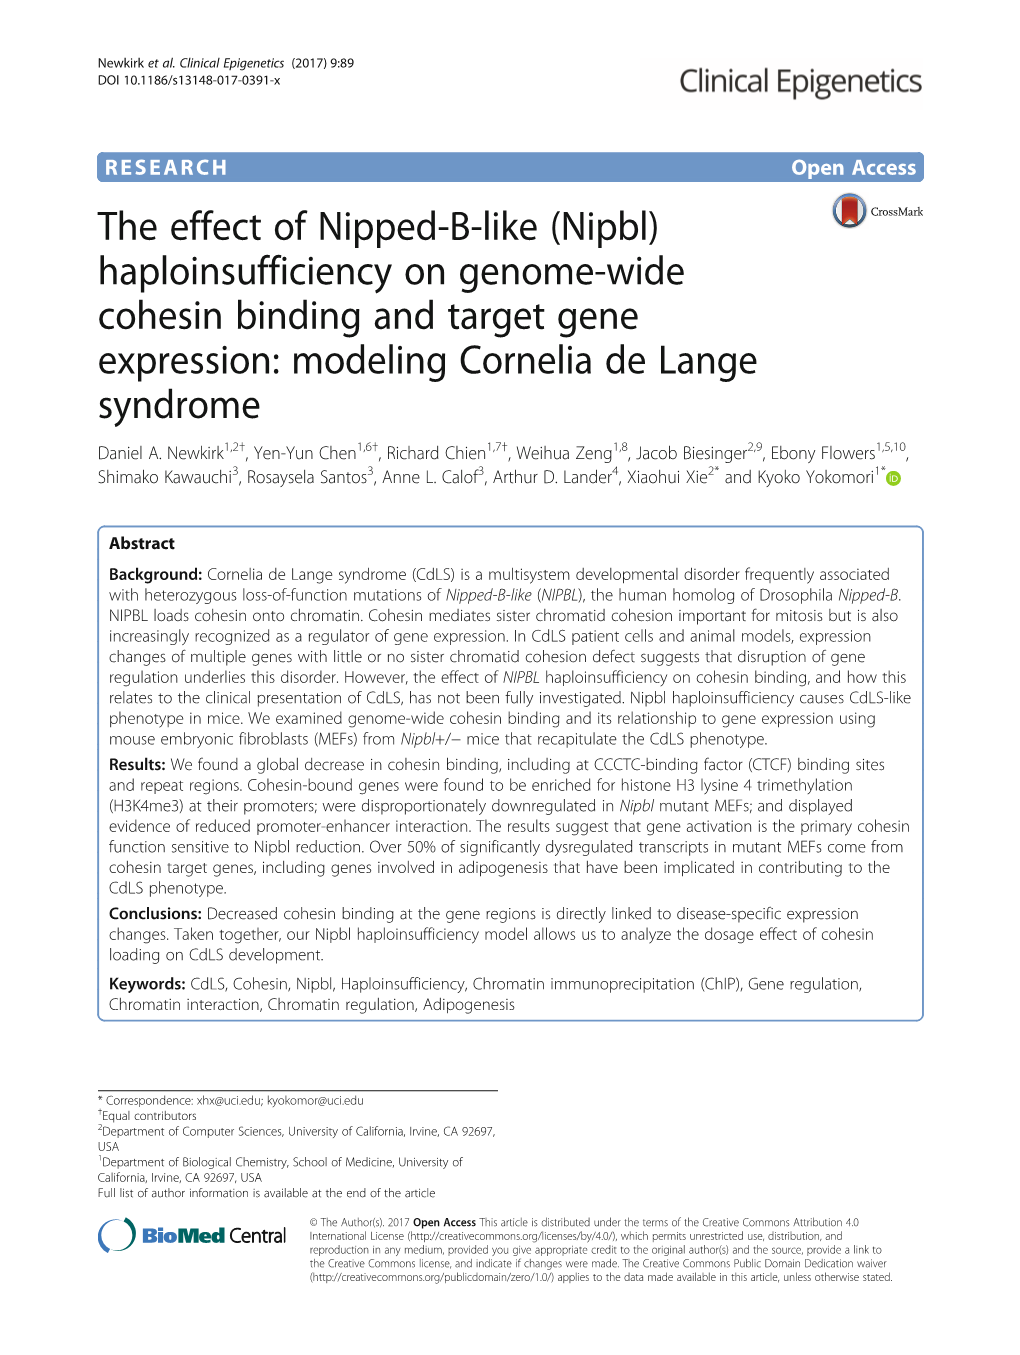 (Nipbl) Haploinsufficiency on Genome-Wide Cohesin Binding and Target Gene Expression: Modeling Cornelia De Lange Syndrome Daniel A